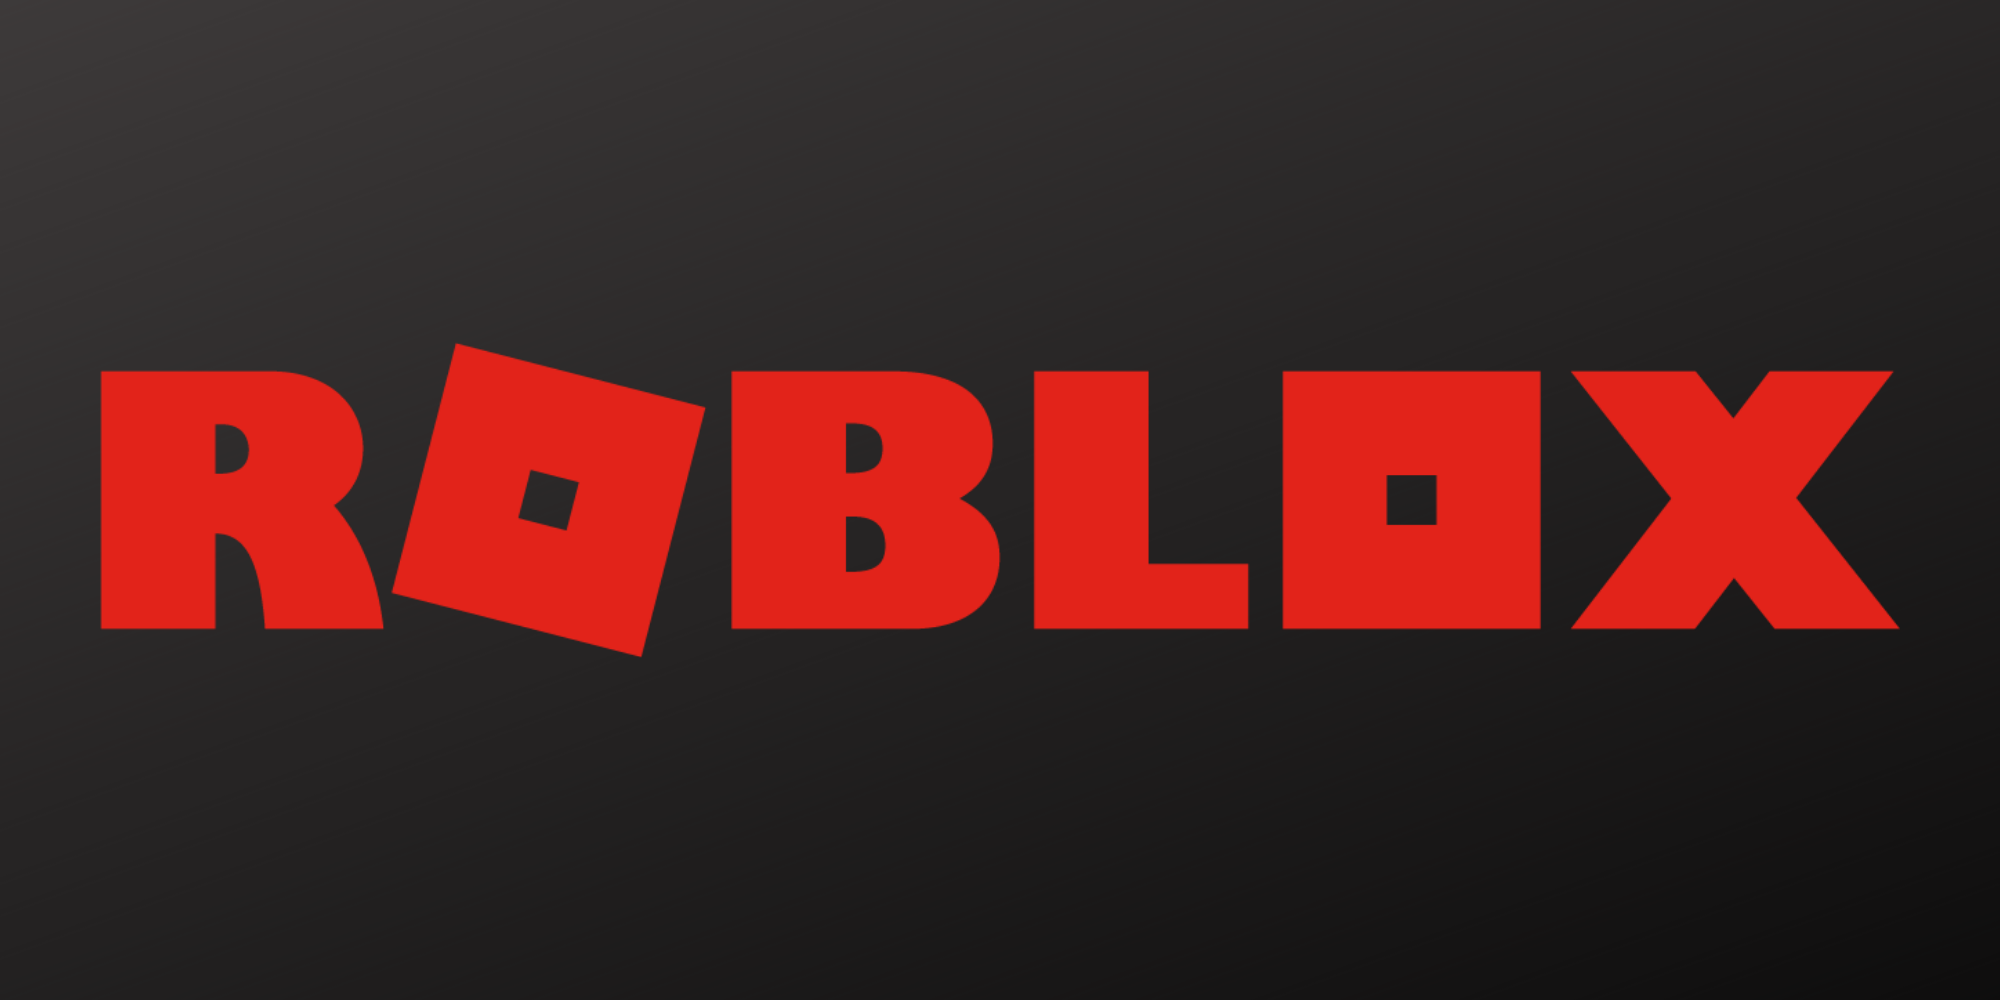 Eyeing An Entry Into China Roblox Enters Strategic Partnership With - eyeing an entry into china roblox enters strategic partnership with tencent